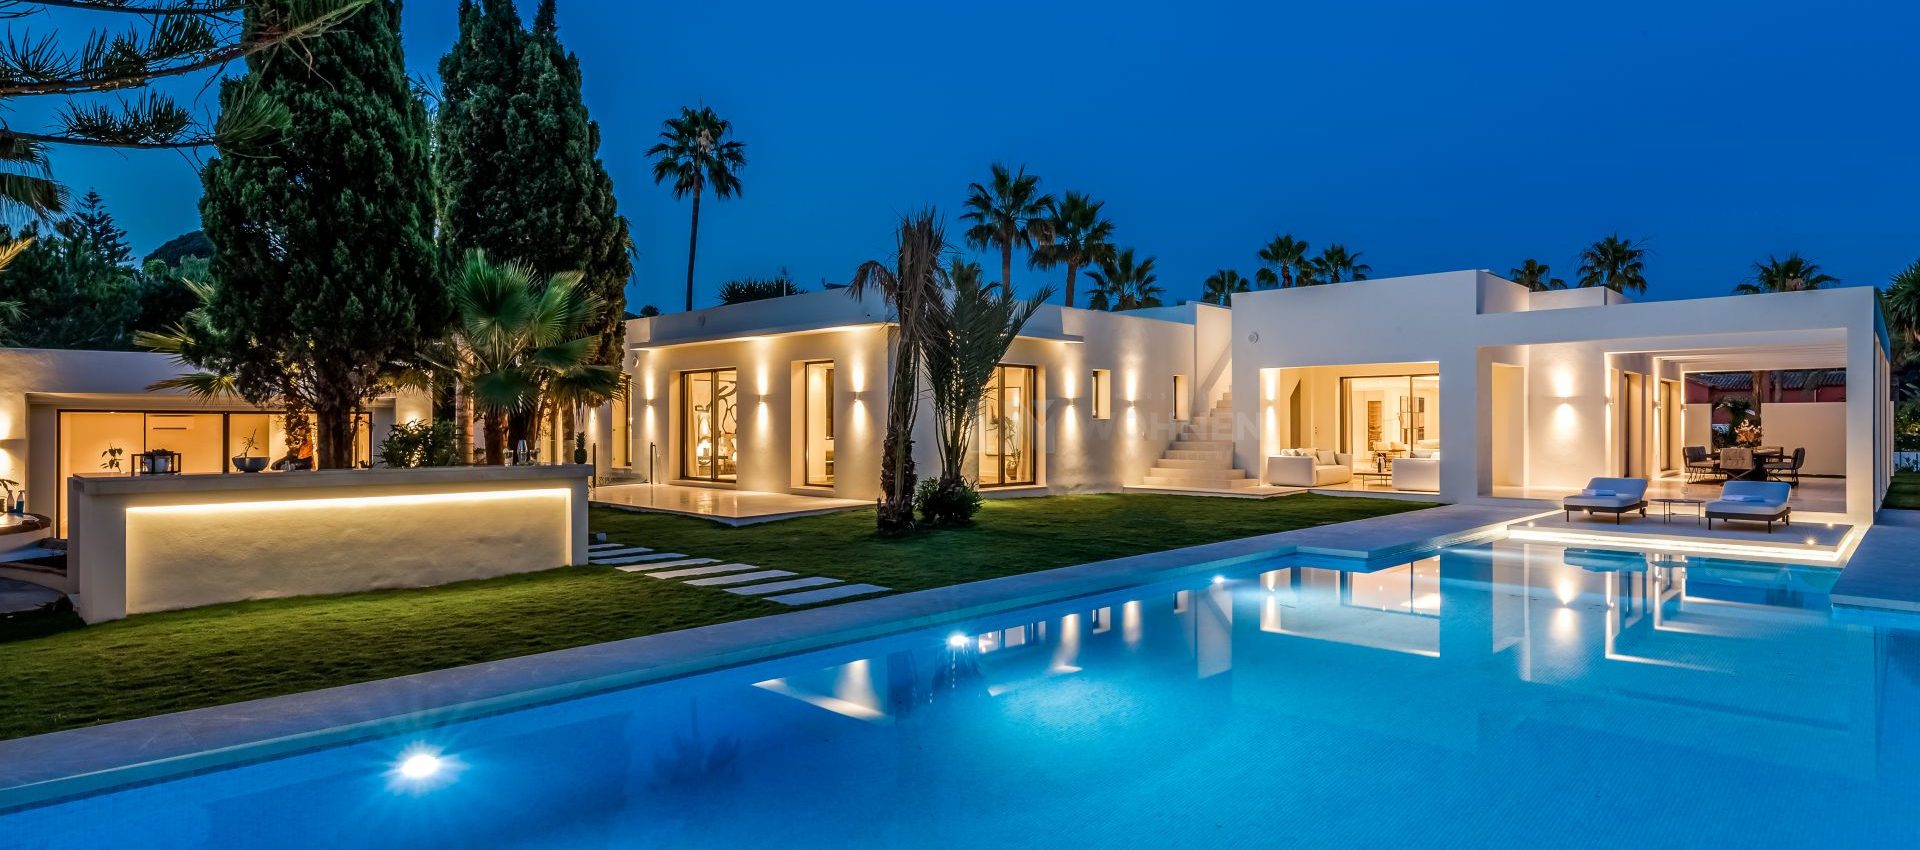 A New Concept of Luxury Living Next to the Beach – Marbella